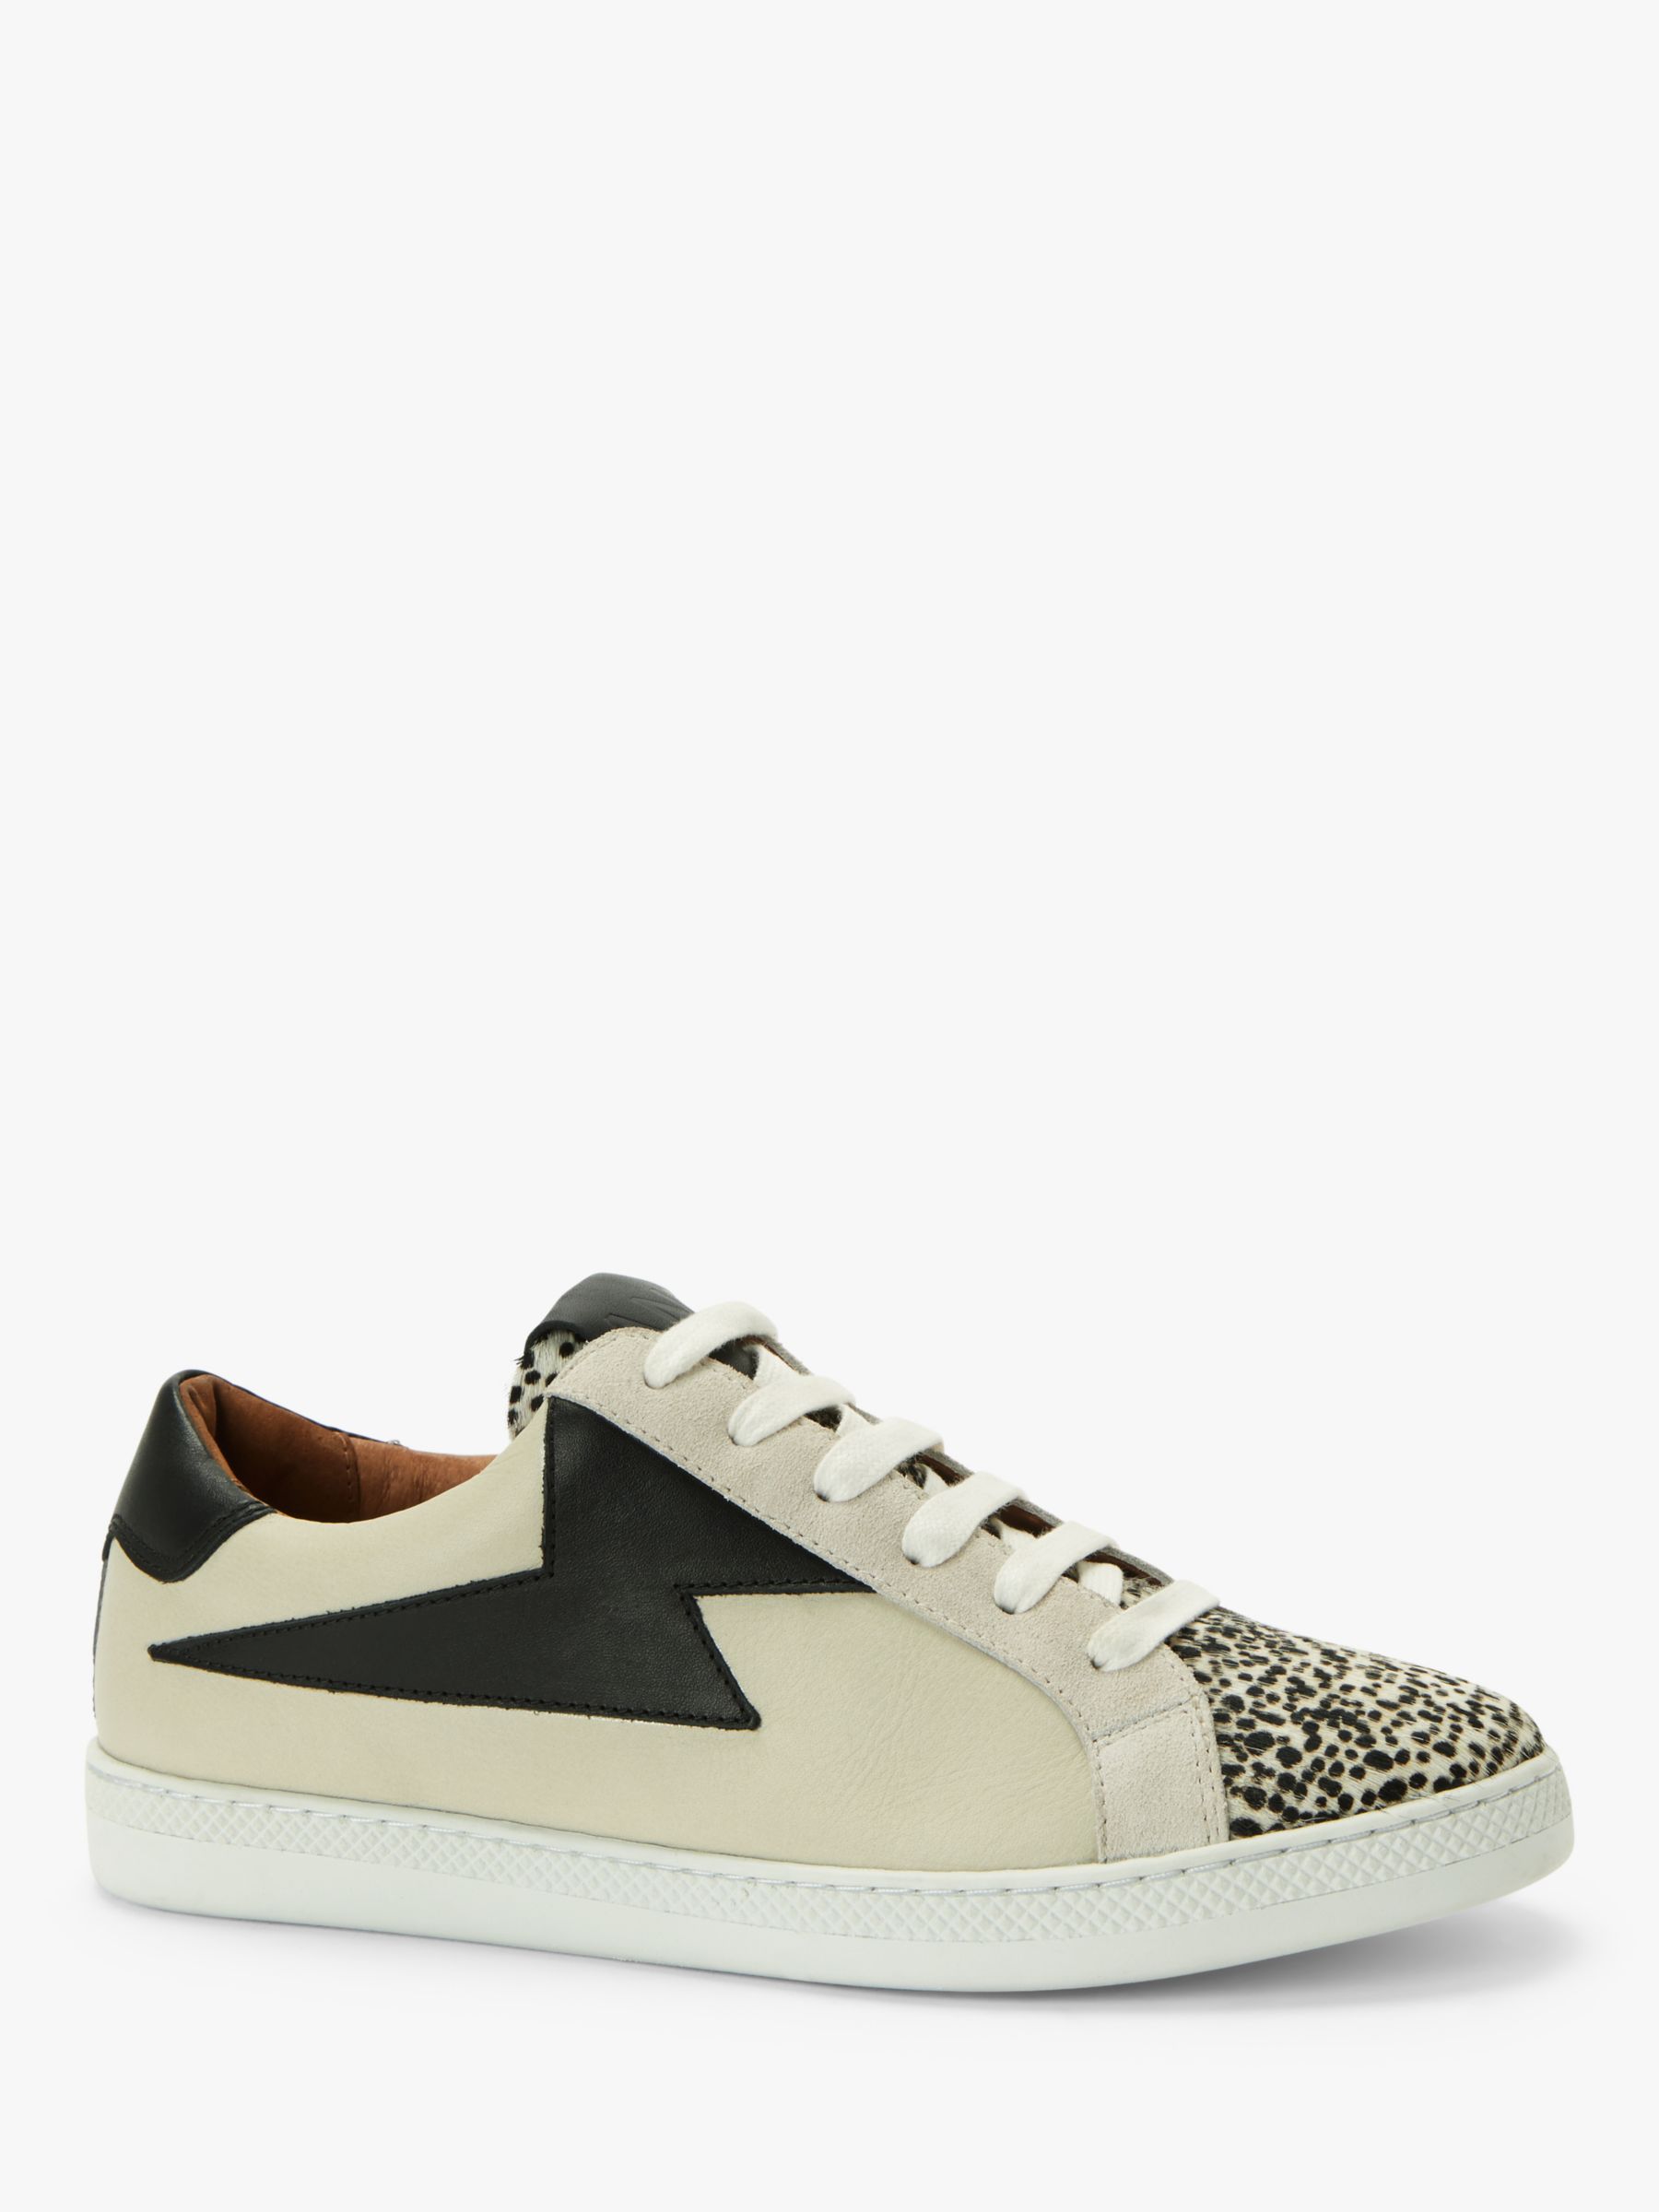 AND/OR Etty Zig Zag Mix Leather Trainers, Beige